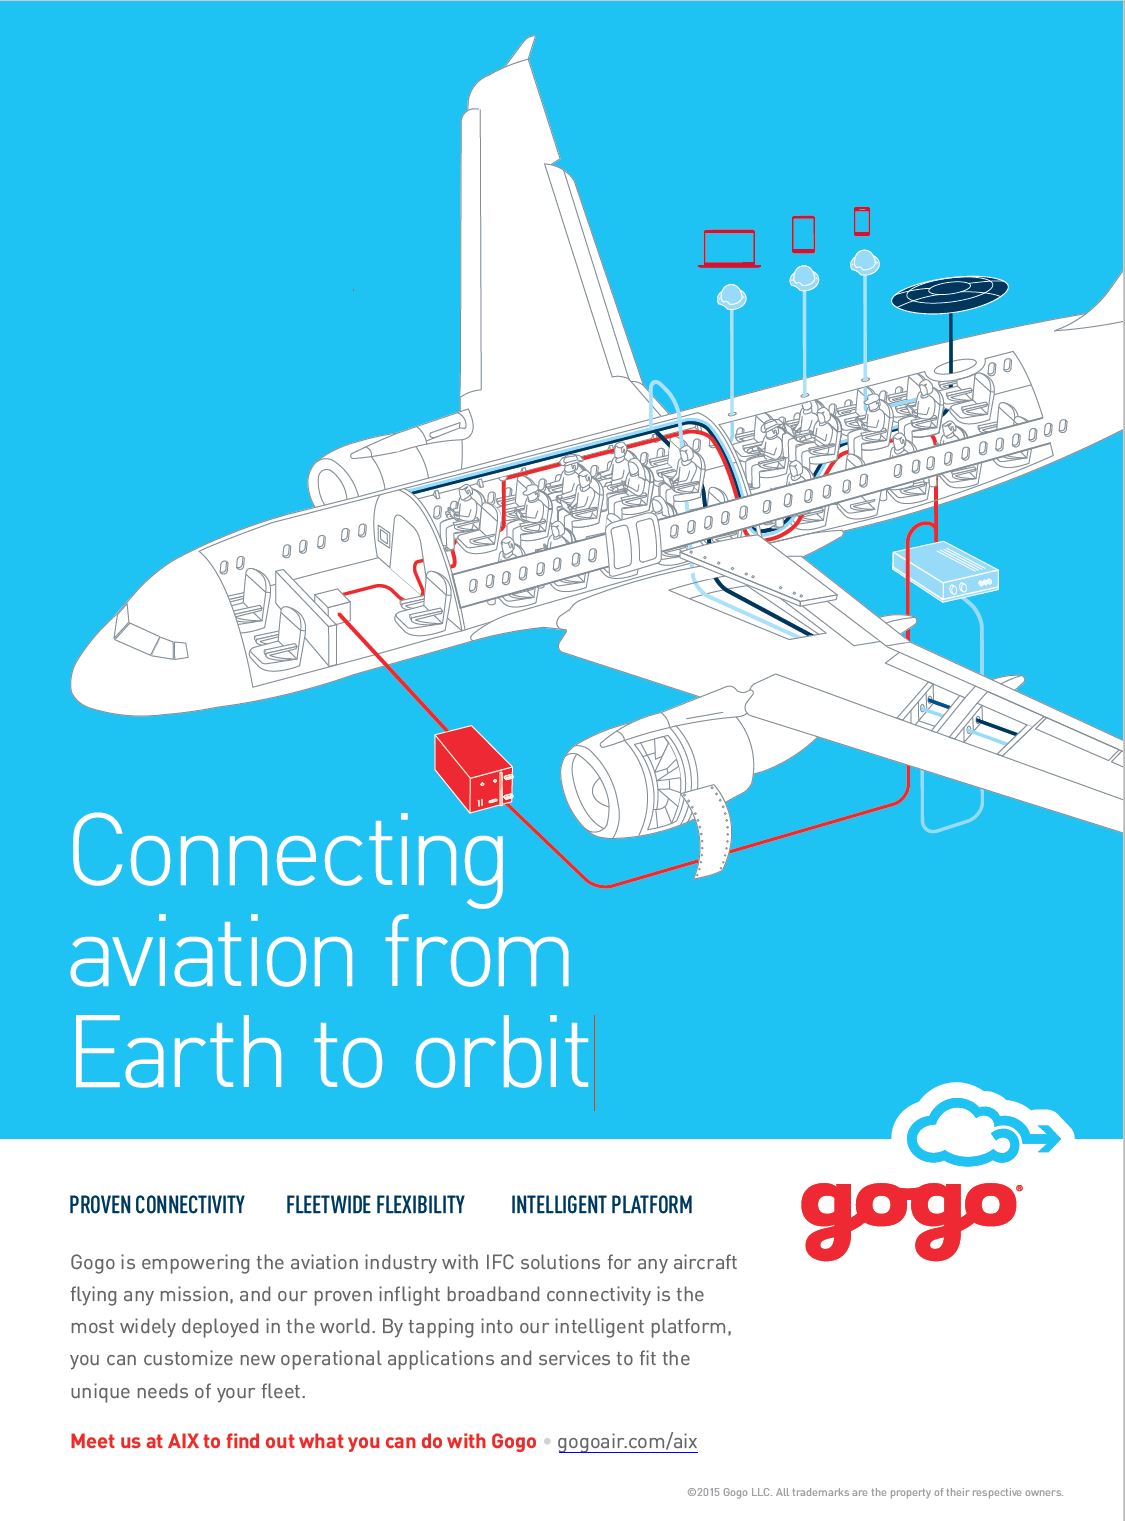 gogo - Connecting aviation from earth to orbit